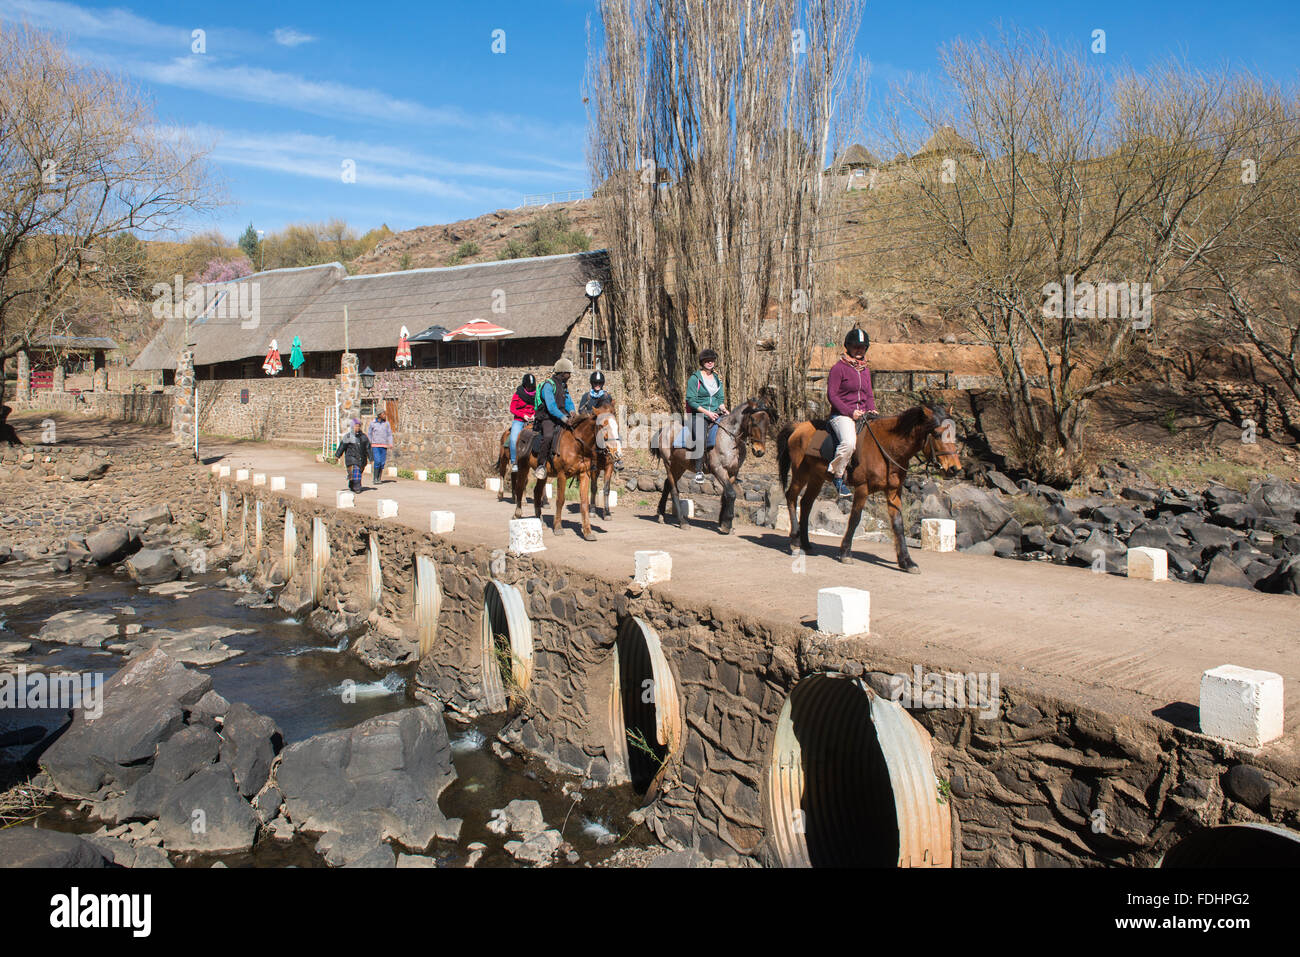 Tourists going on a pony ride over a bridge at the Somenkong Lodge in Somenkong, Lesotho, Africa Stock Photo